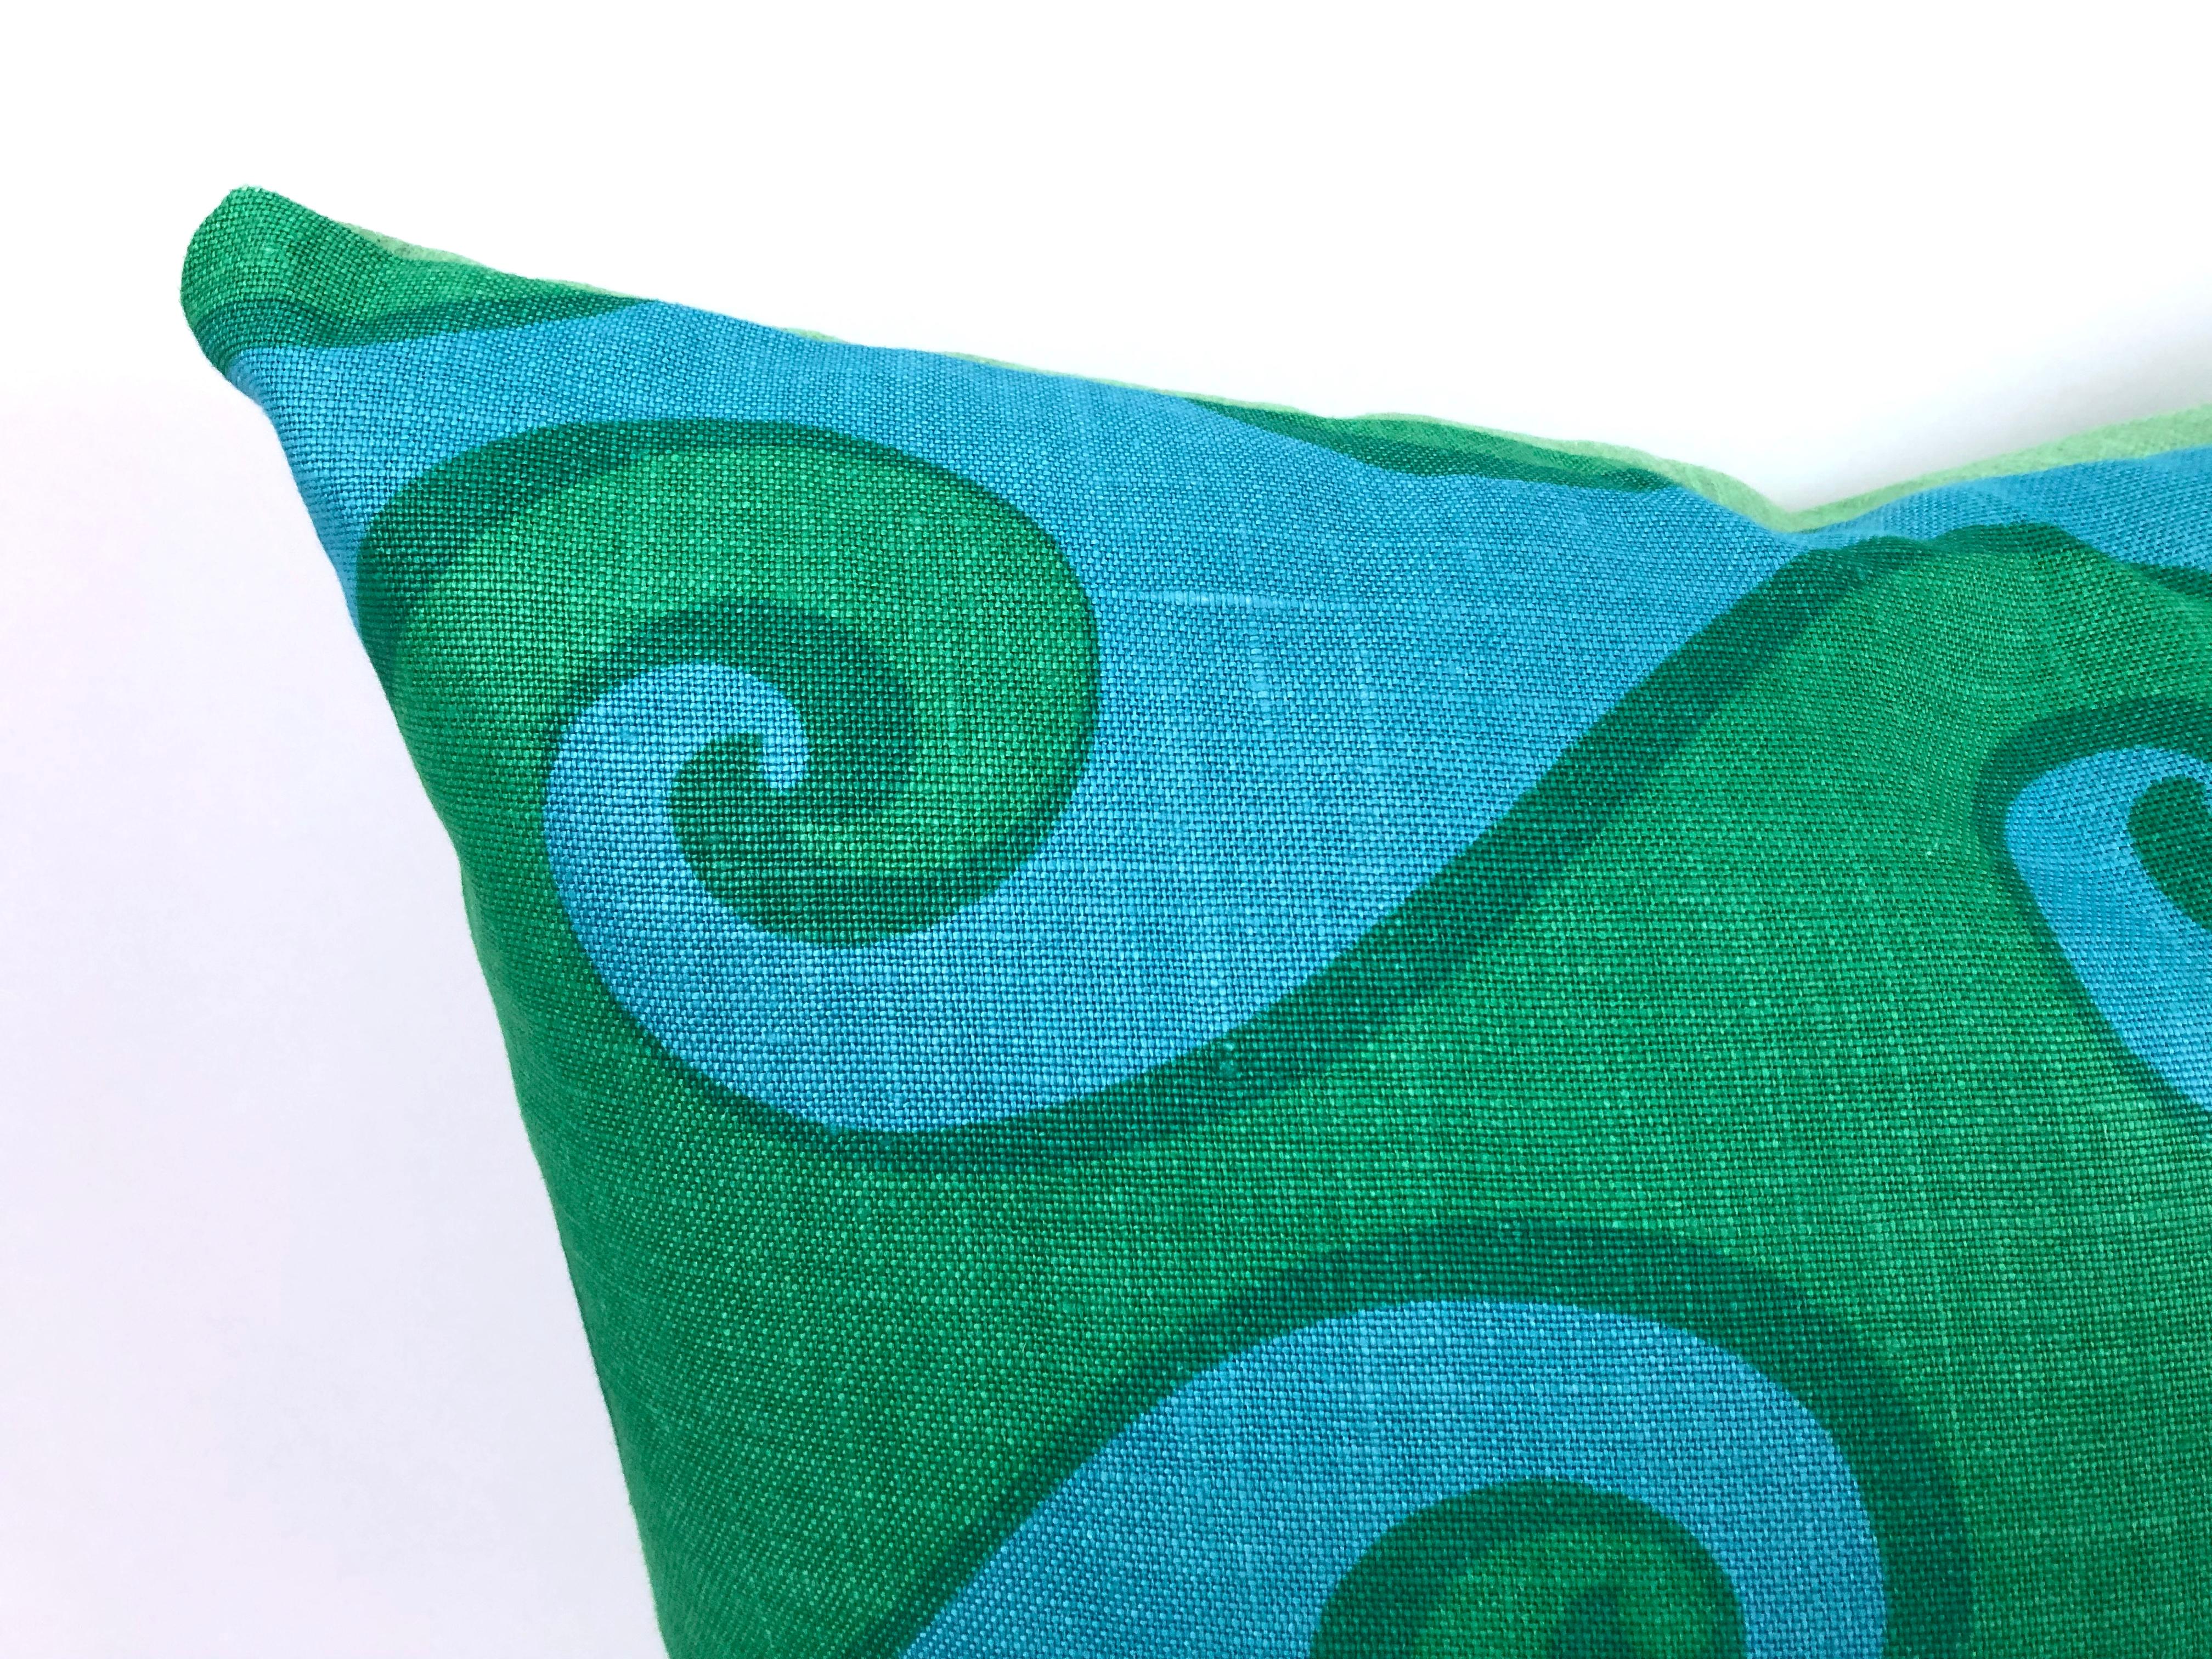 American Vintage Blue and Green Sea Scroll Pattern Pillow Hand Printed by Elenhank